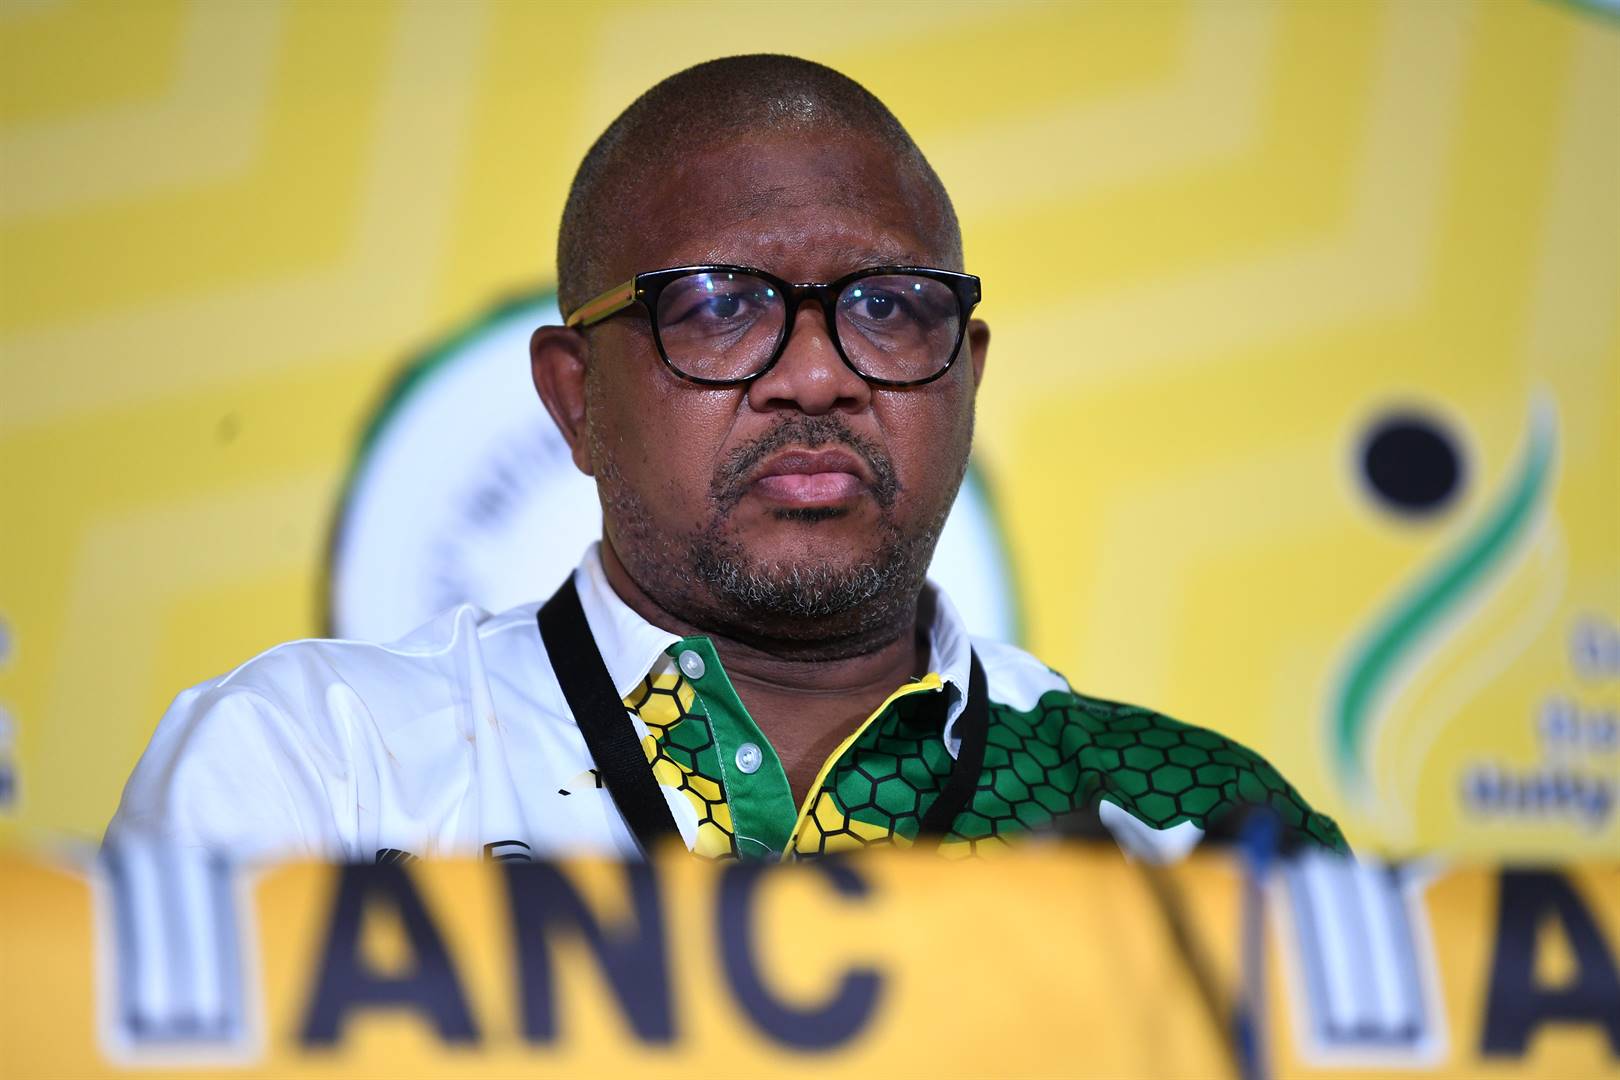 THE DA wants the ANC's secretary-general Fikile Mbalula jailed for contempt of court over failure to hand over the party's cadre deployment records. 